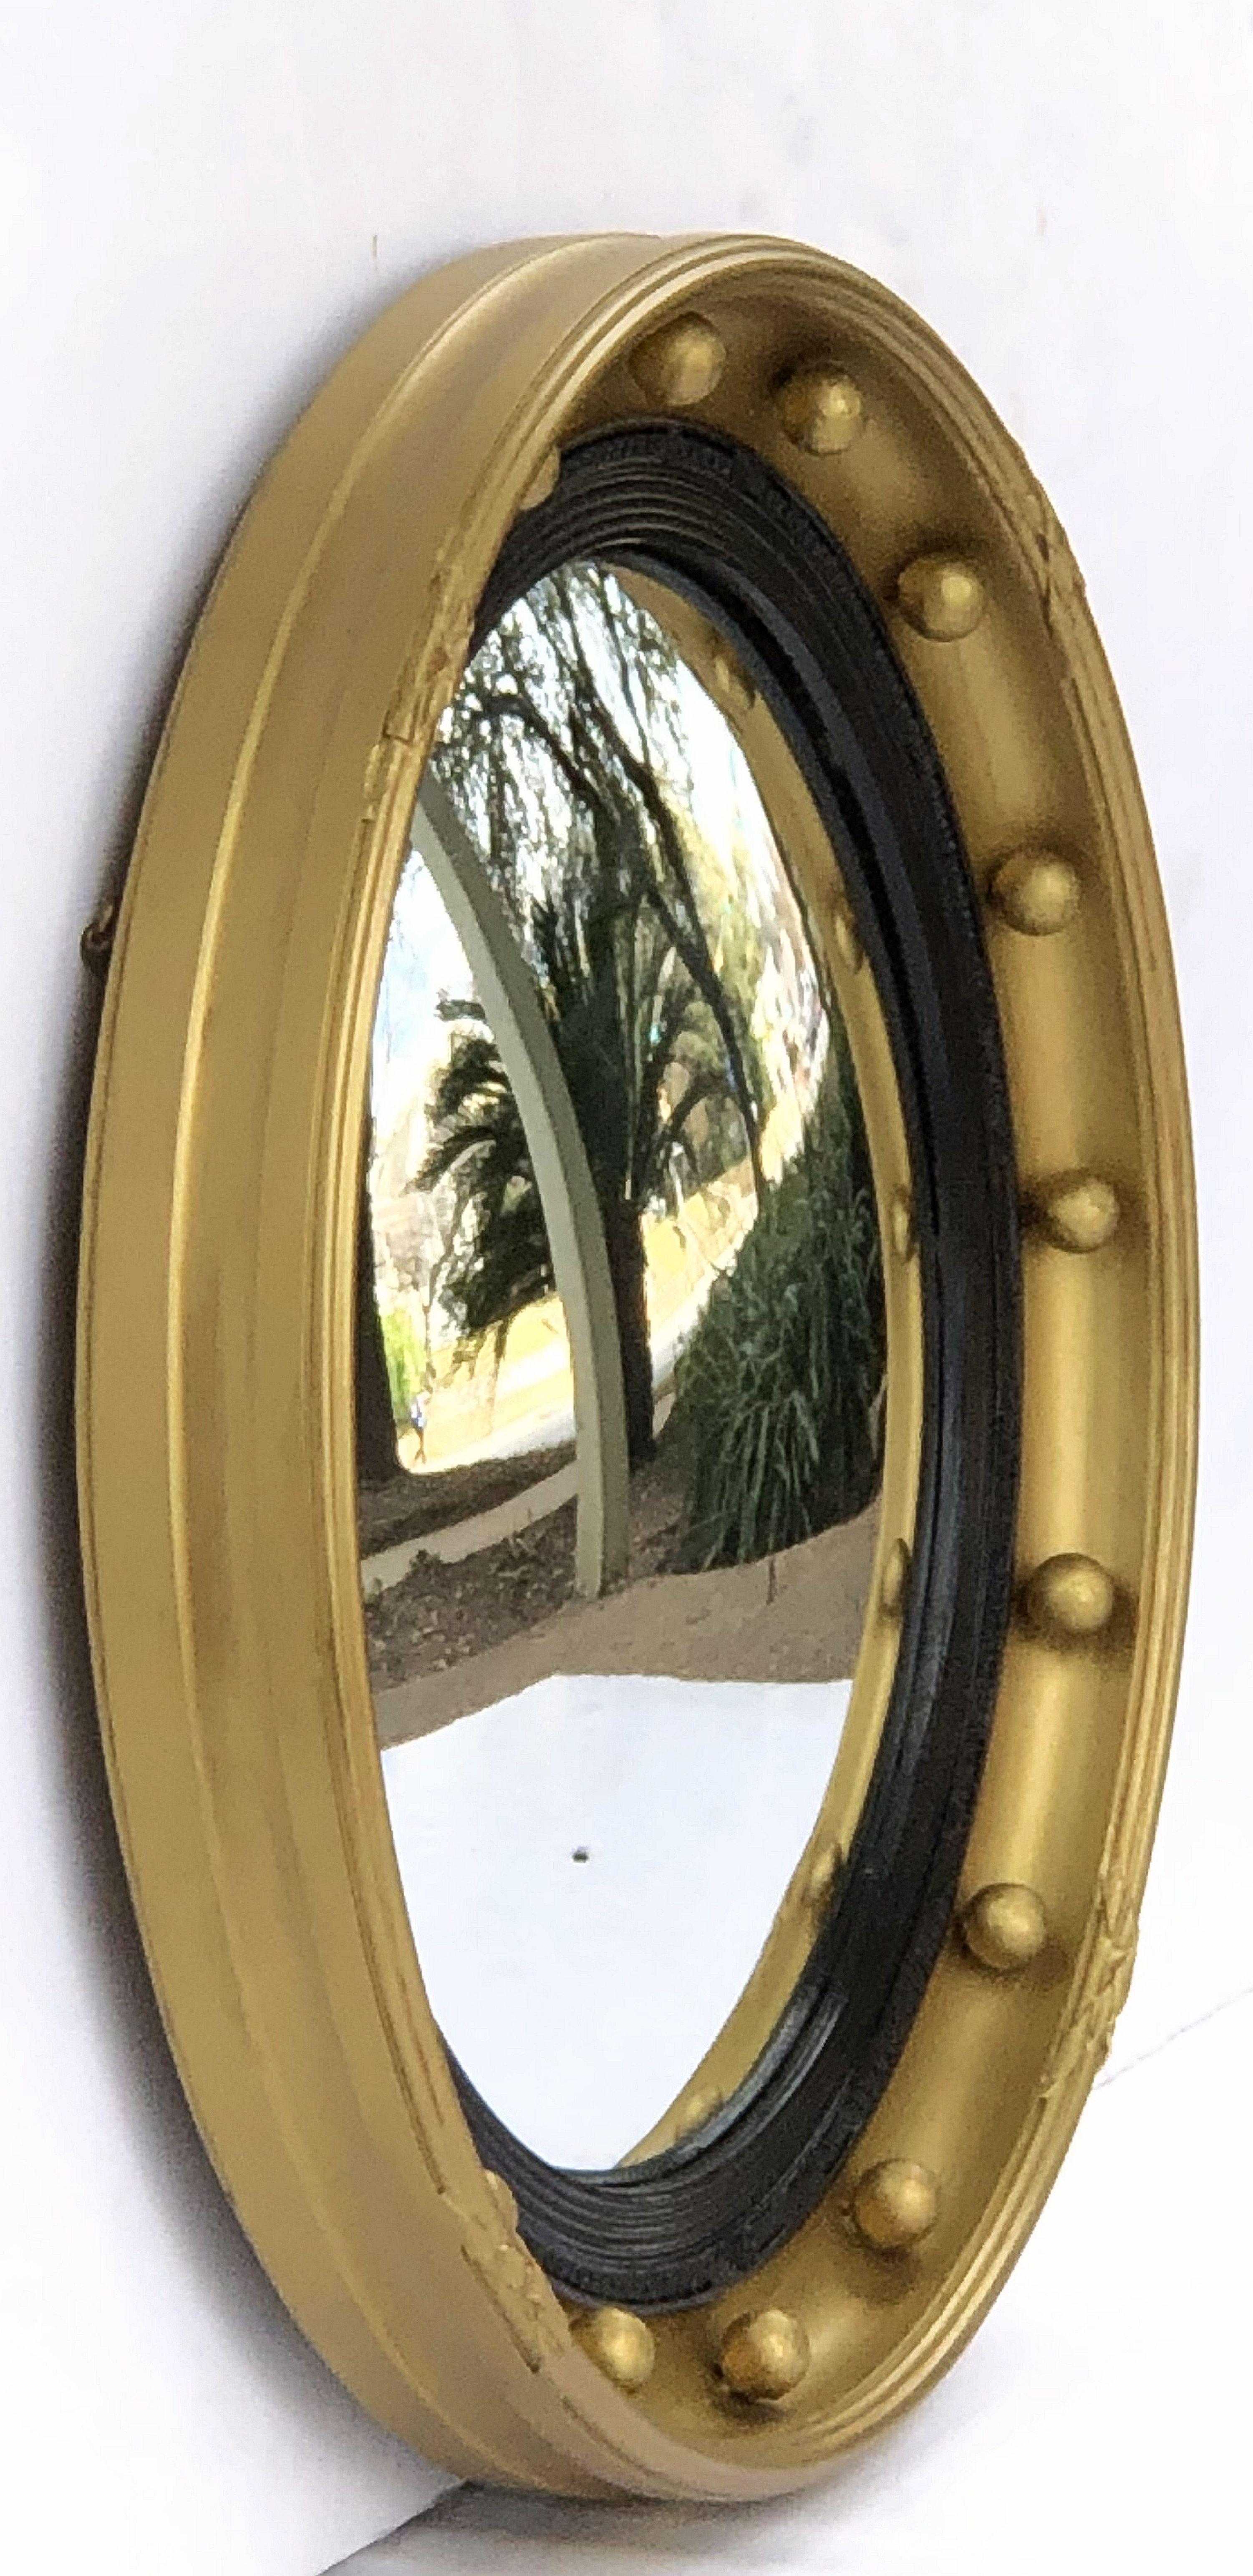 A fine English round or circular convex mirror featuring a Regency design of a moulded gilt frame and ebonized trim, with gilt balls around the circumference.

Dimensions: Diameter 18 3/4 inches x Depth 2 1/4 inches.